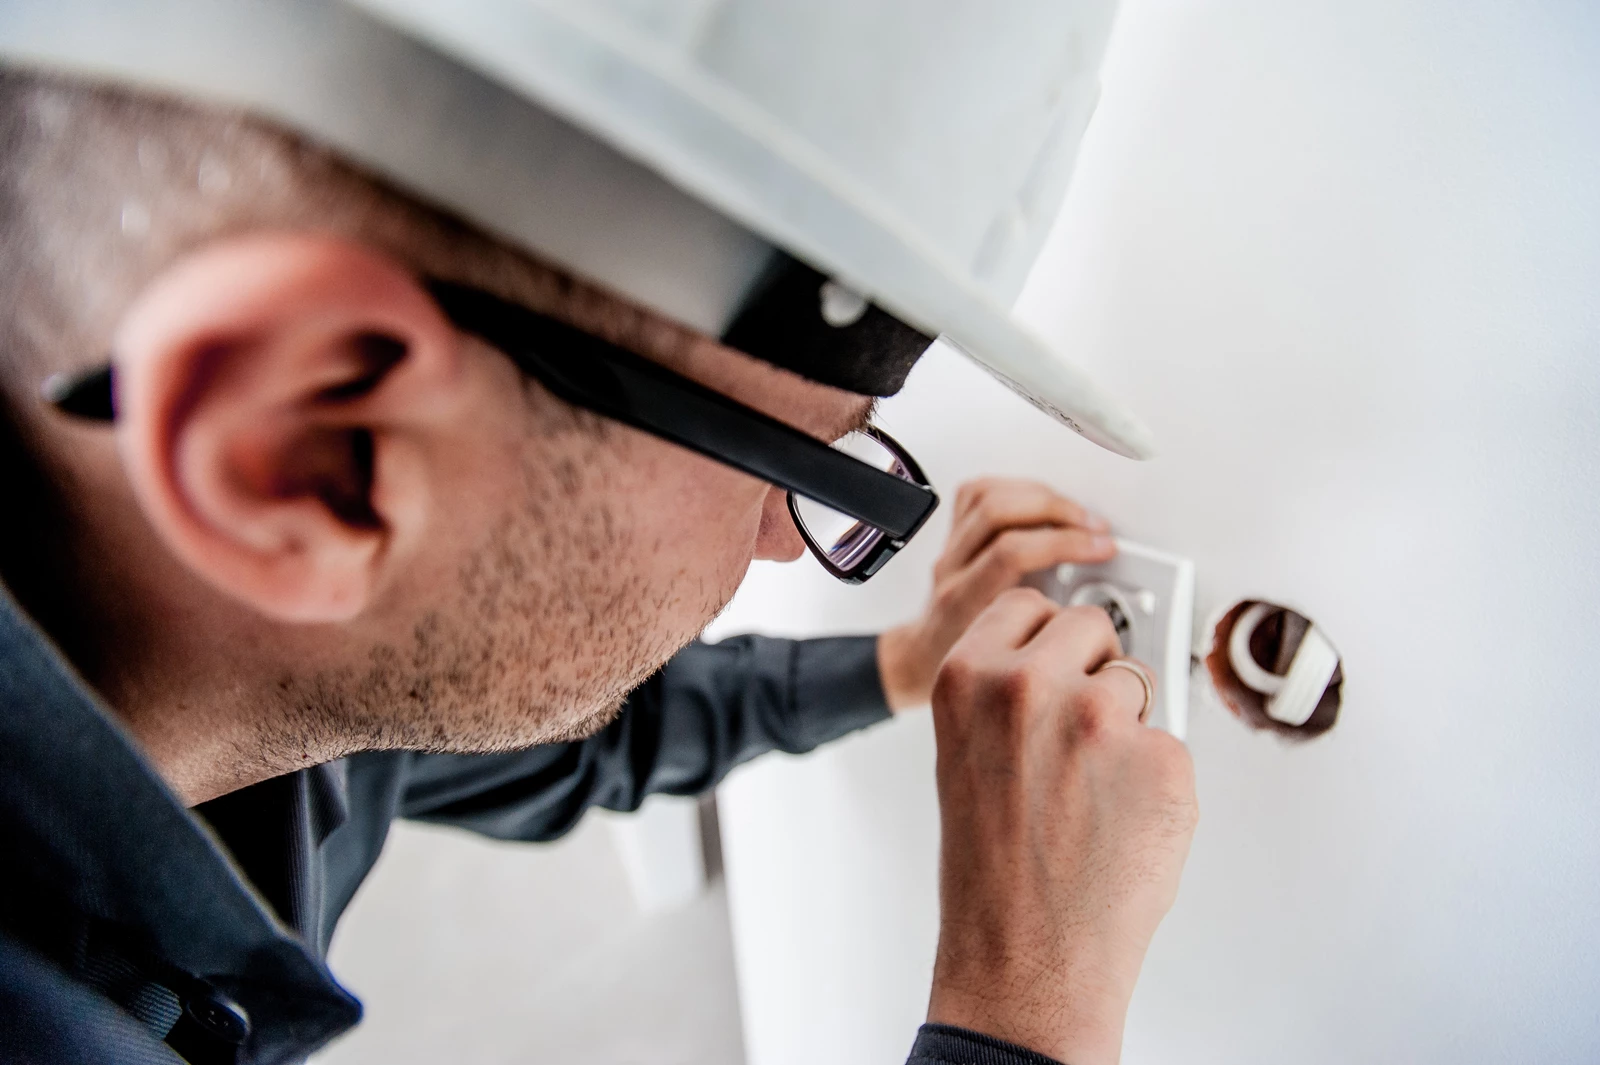 An electrician installing a plug into a wall